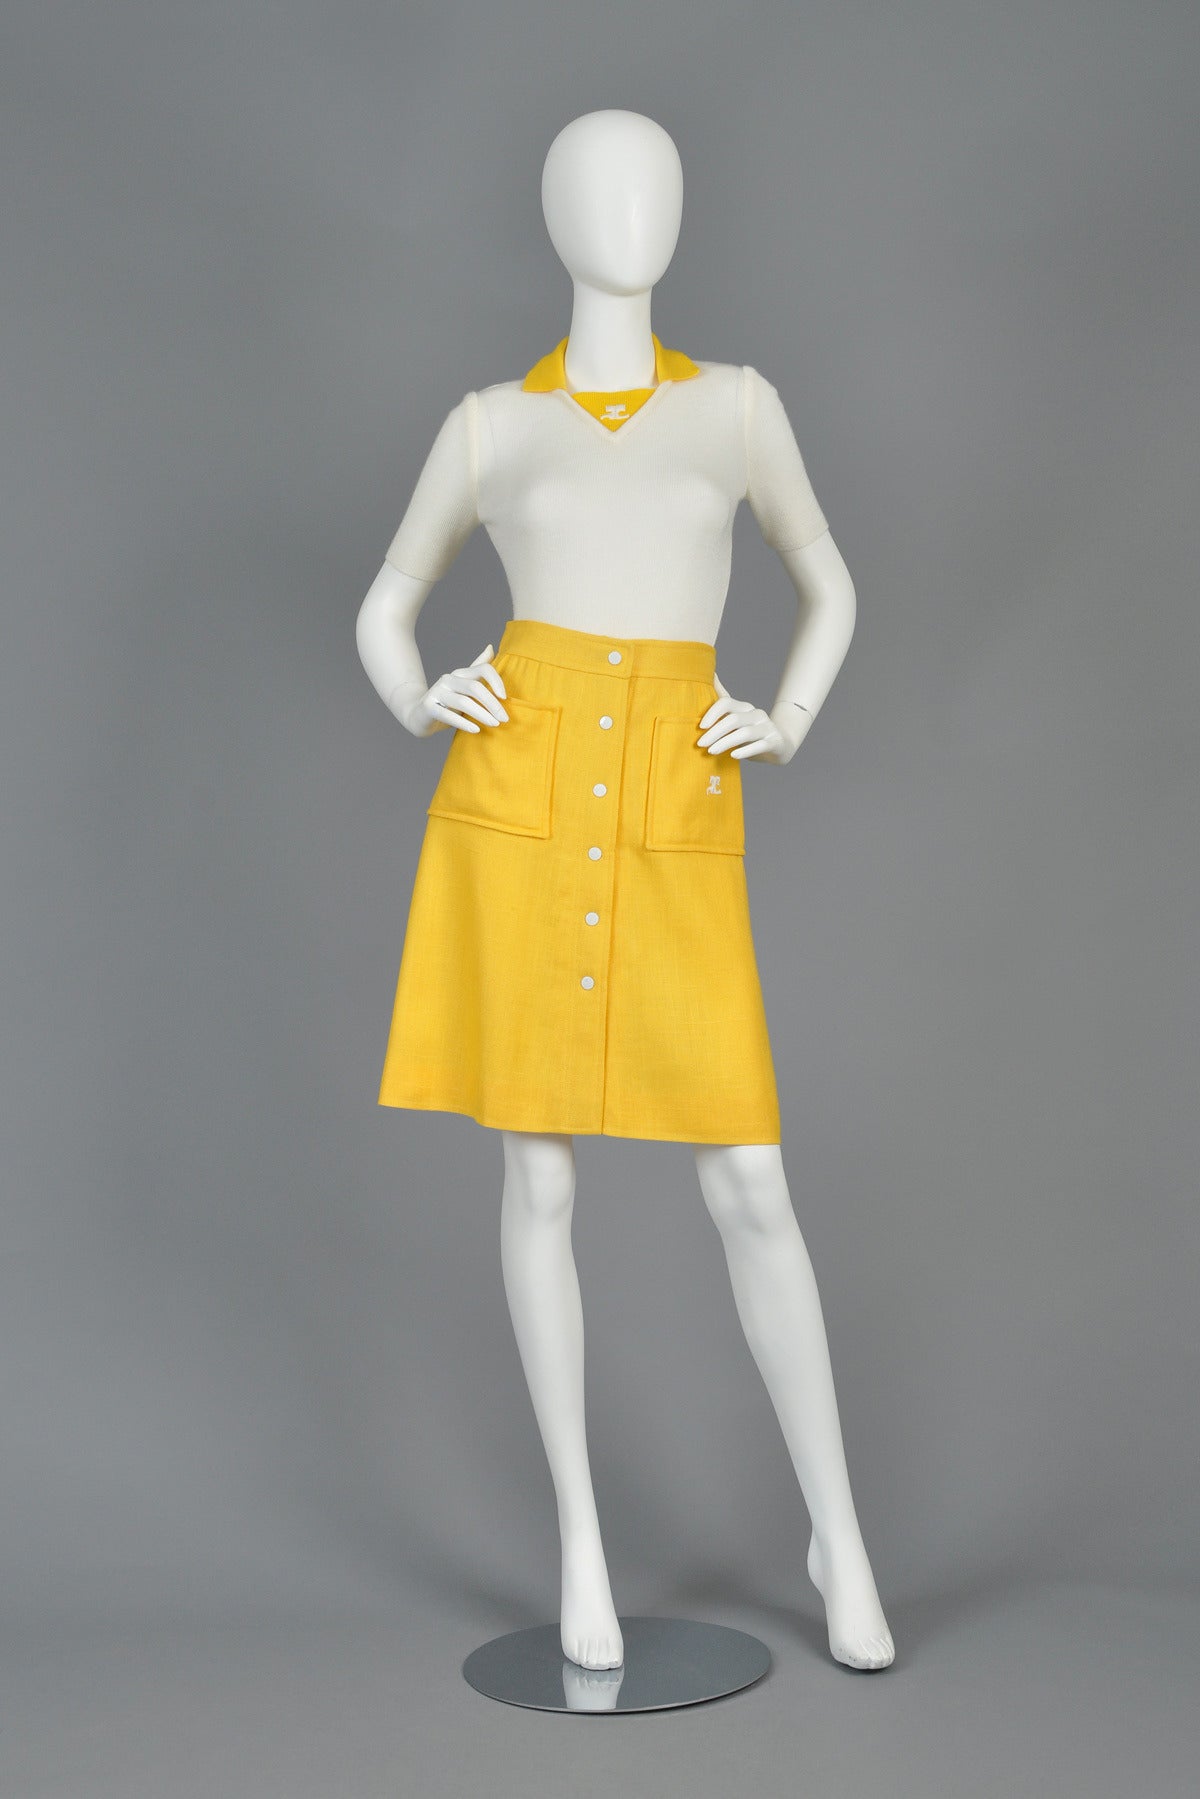 Classic Courrèges! Vintage 1960s skirt by Andre Courrèges. Oversized pockets with Courrèges logo. Snap front with contrasting white buttons. Fantastic bright yellow linen-textured rayon. Numbered Courrèges mainline label + Bonwit Teller tag.